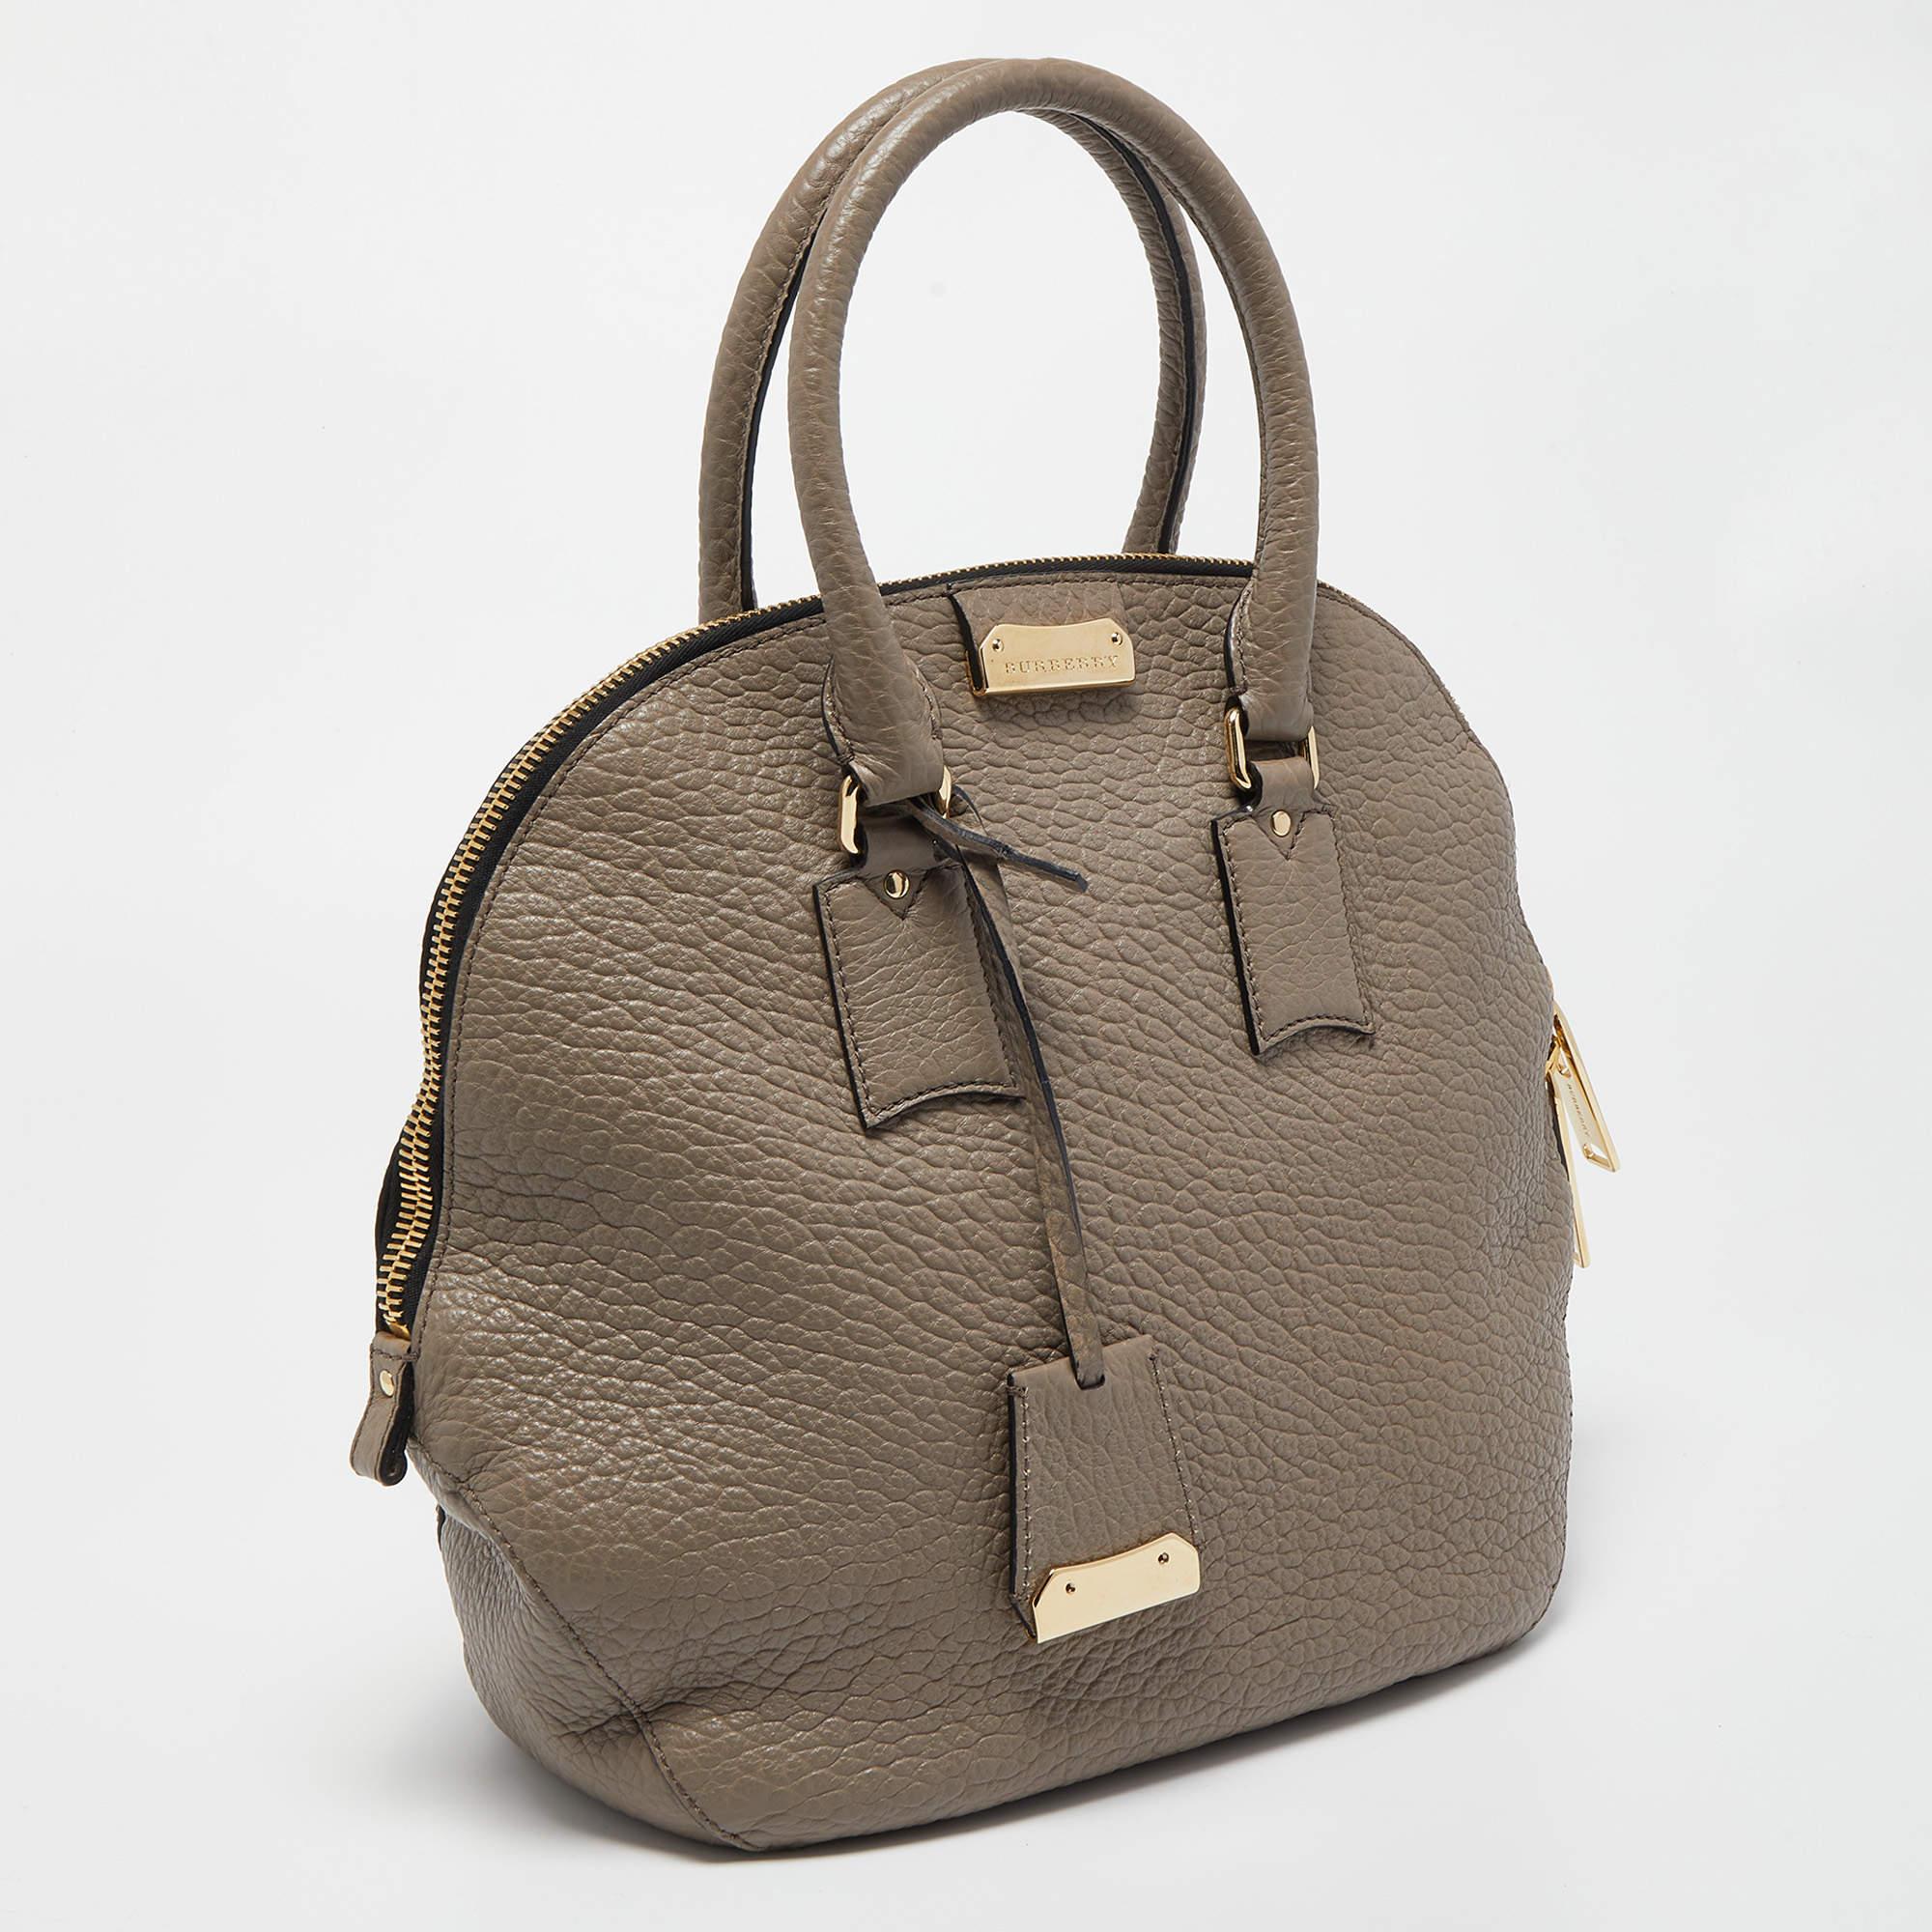 Functional and stylish, this designer label's collections capture the effortless, elegant finesse of the modern woman. Crafted from quality materials, this chic bag is easy to carry and can fit in your daily essentials effortlessly.

